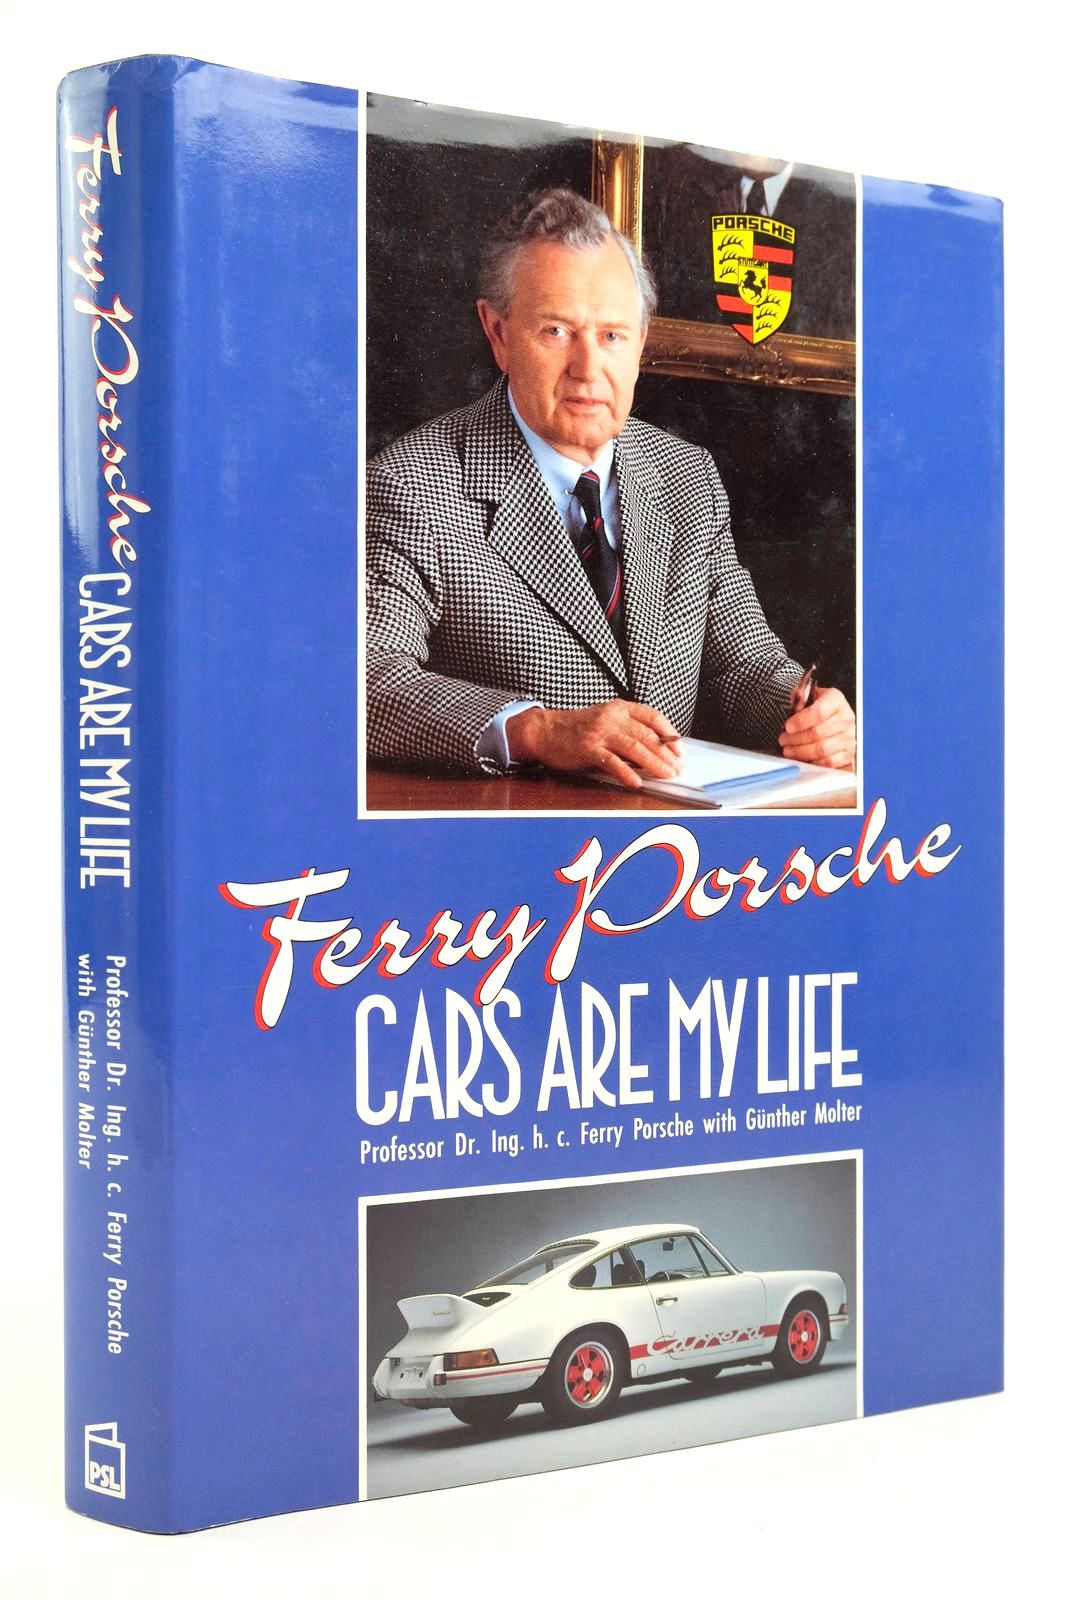 Photo of FERRY PORSCHE: CARS ARE MY LIFE written by Porsche, Ferry Molter, Gunther published by Patrick Stephens Limited (STOCK CODE: 2139983)  for sale by Stella & Rose's Books